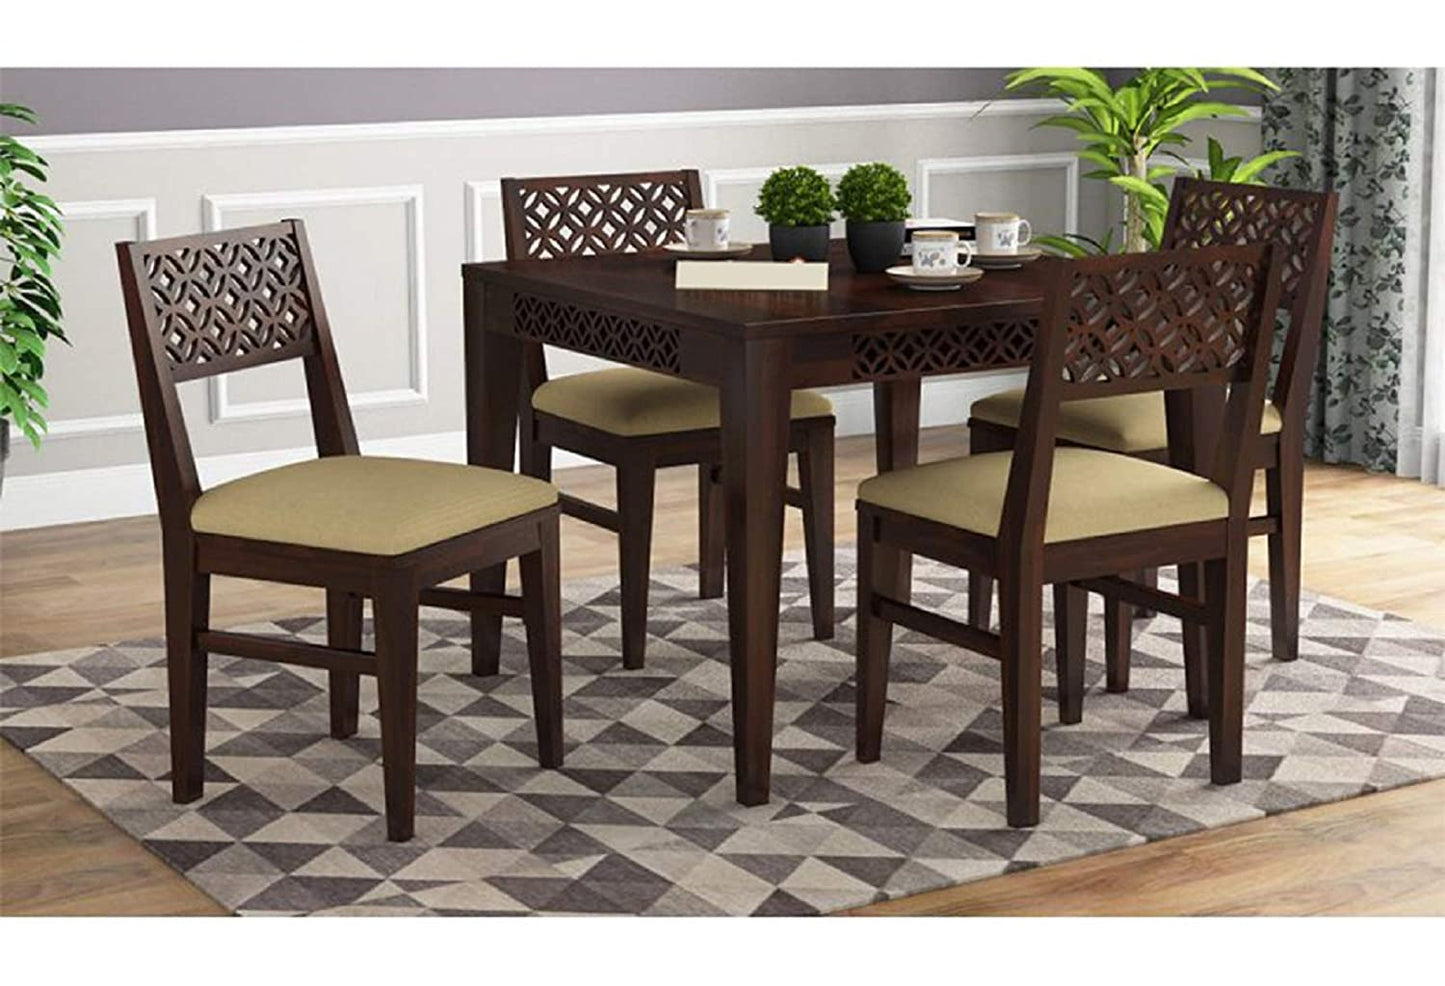 WeeHom Furniture Sheesham Wood CNC 4 Seater Cream Cushion Dining Set of Wooden Dining Table with Chairs for Living Room